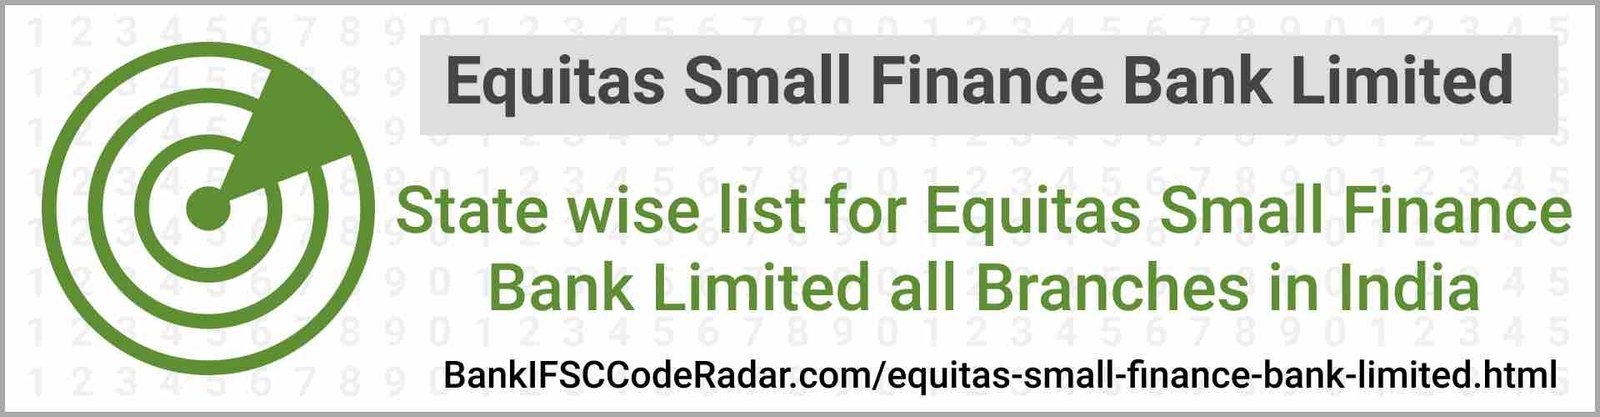 Equitas Small Finance Bank Limited All Branches India